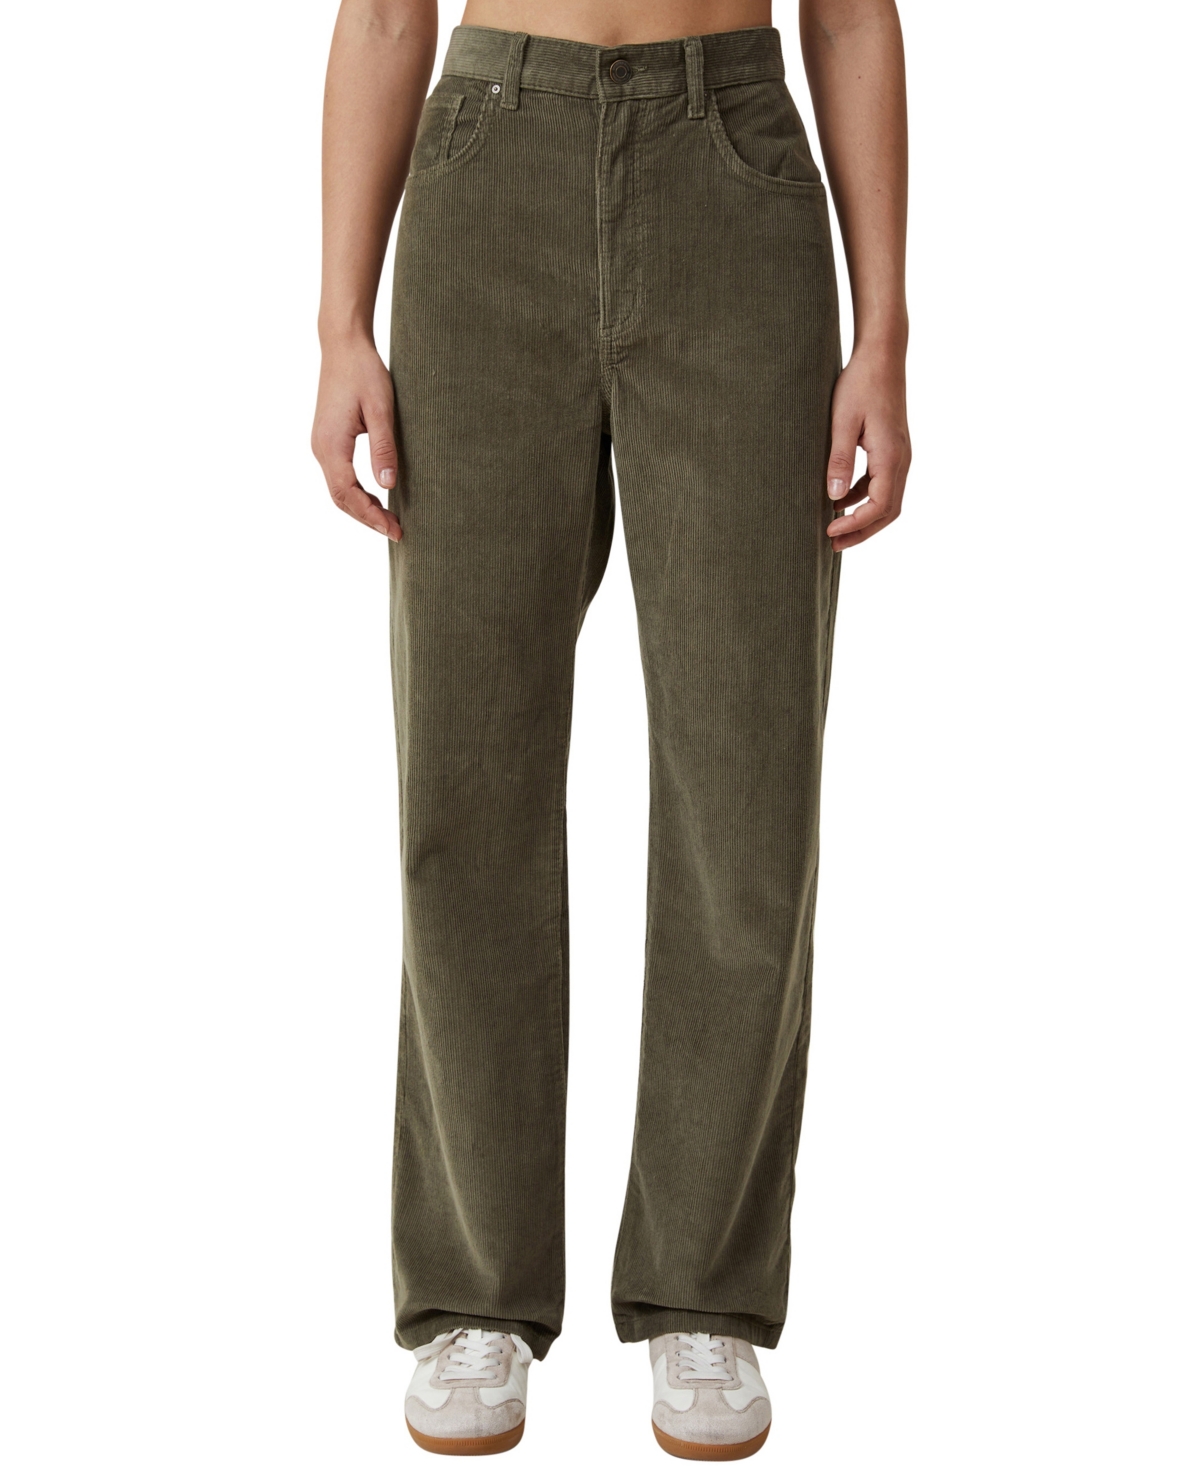 Women's Cord Straight Jeans - Woodland